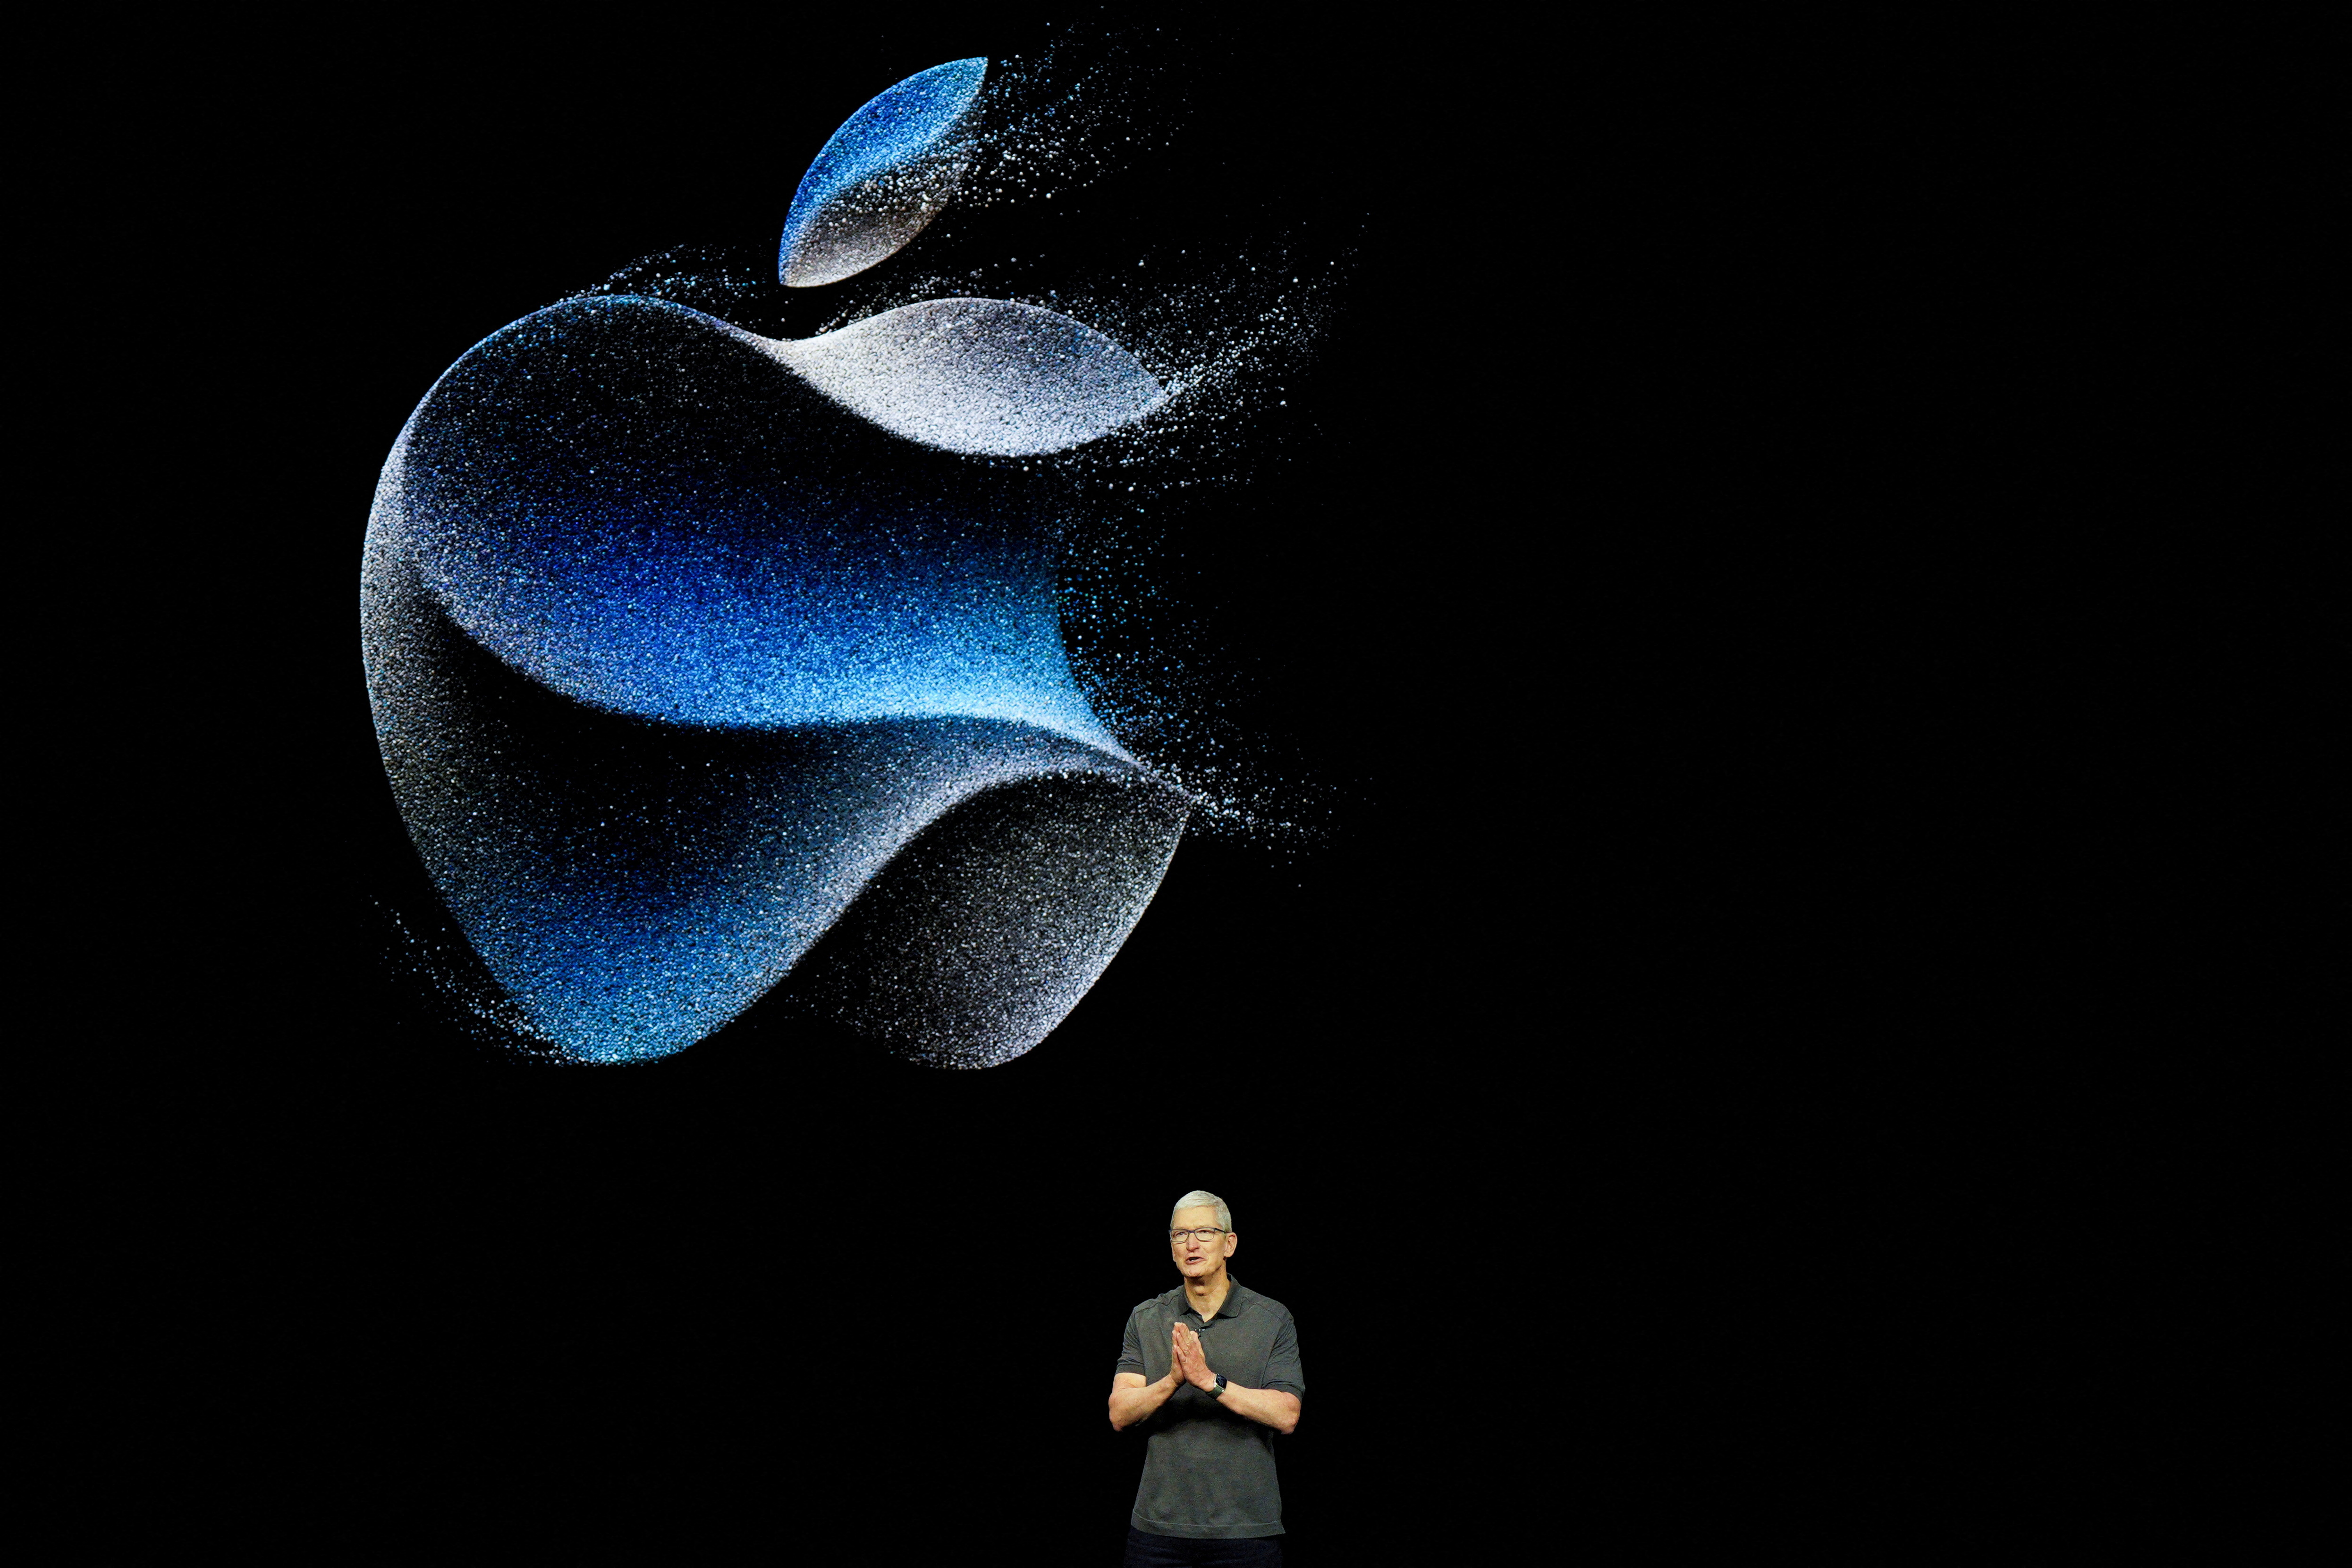 Apple's CEO, Tim Cook, is shown at a company event in Cupertino